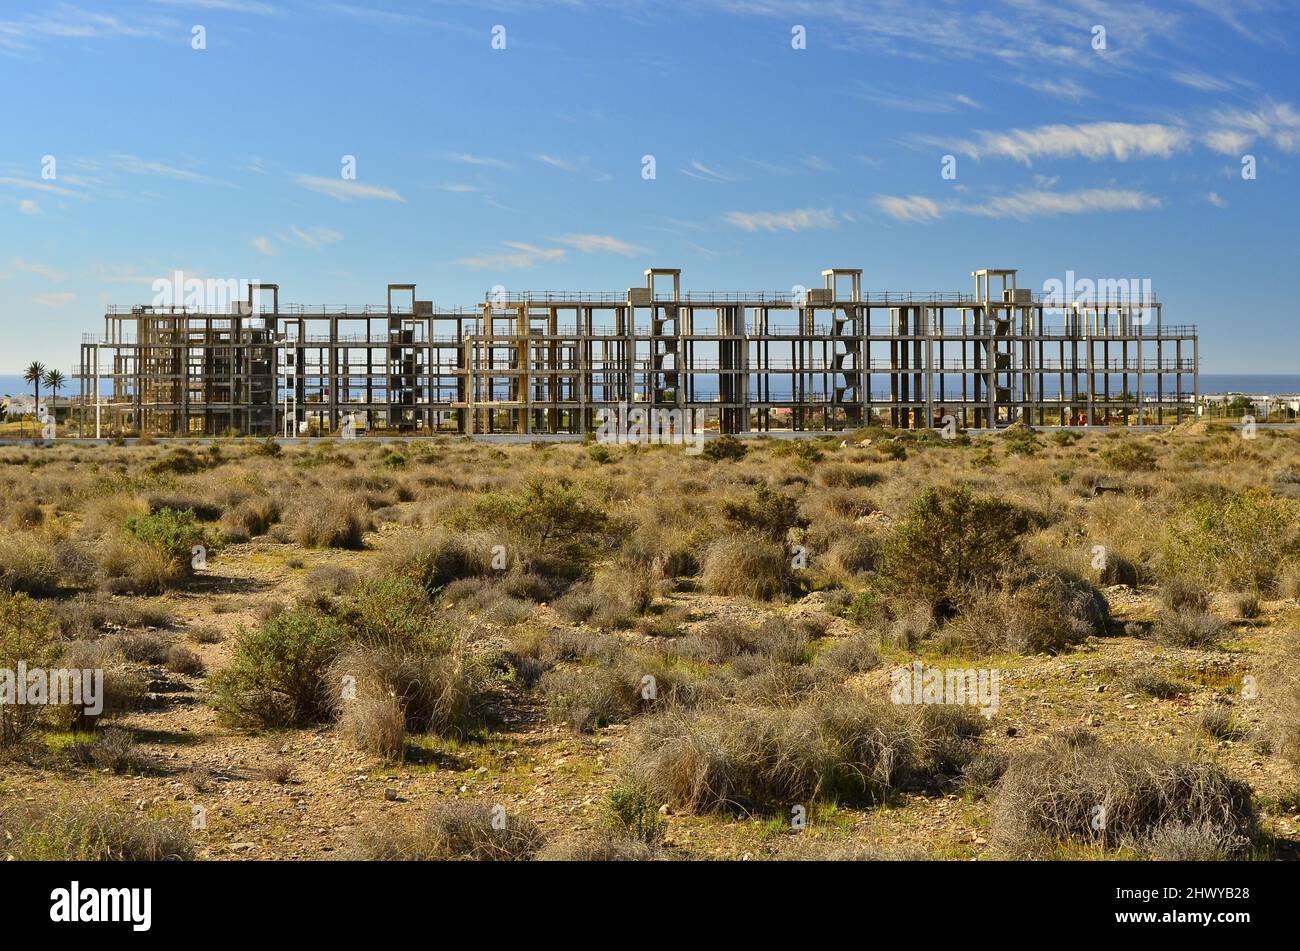 Unfinished property on the Mediterranean coast, abandoned after 2008 global financial crisis, arid grassy landscape of Almeria southern Spain. Stock Photo